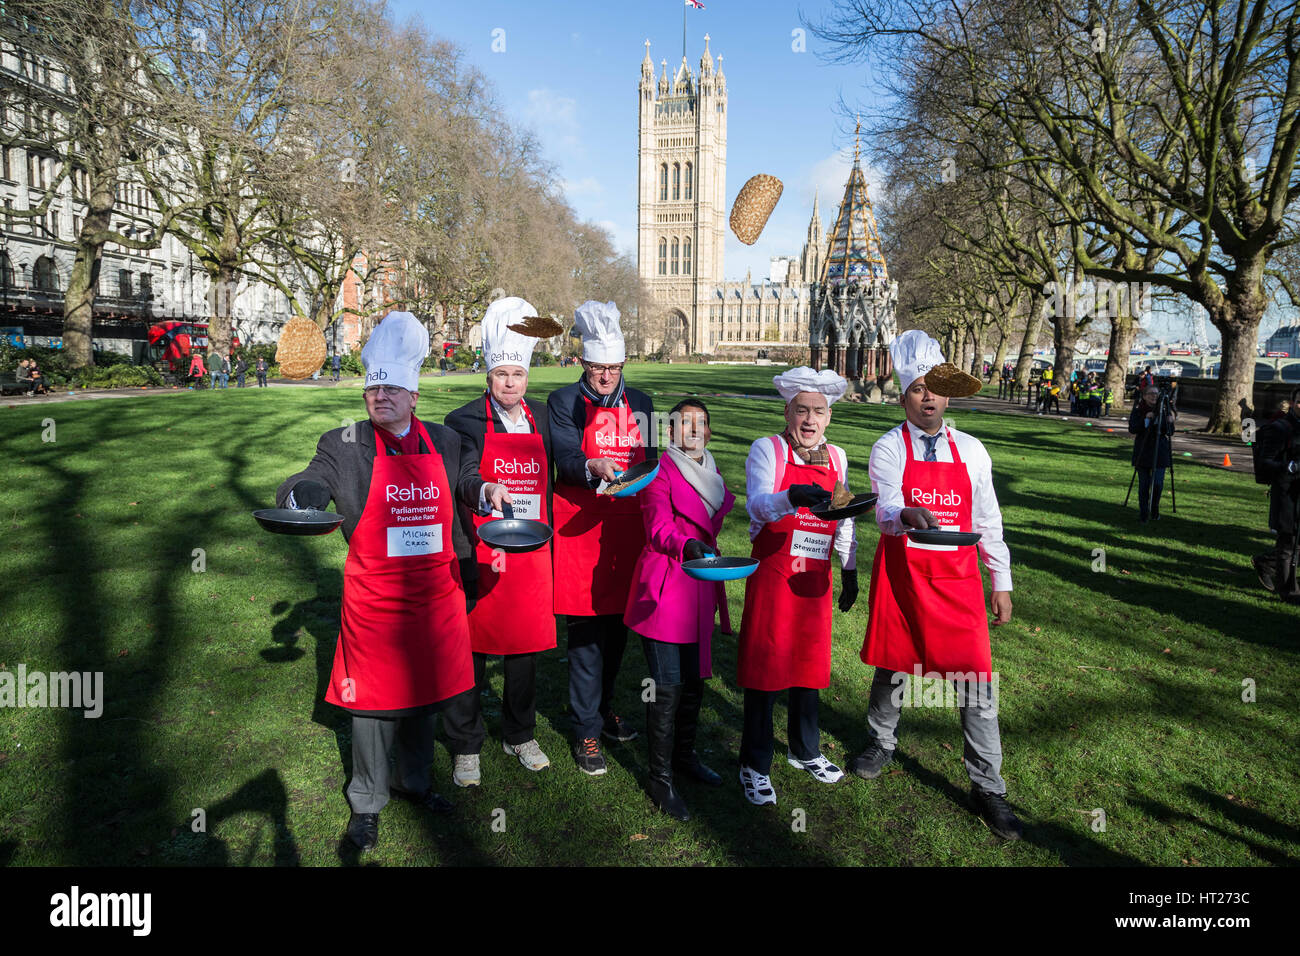 L-R Michael Crick, Robbie Gibb, James Landale, Naga Munchetty, Alastair Stewart and Faisal Islam. MPs, Lords and Media attend the 20th Annual Rehab Parliamentary Pancake Race at Victoria Gardens in Westminster, London, UK. Stock Photo